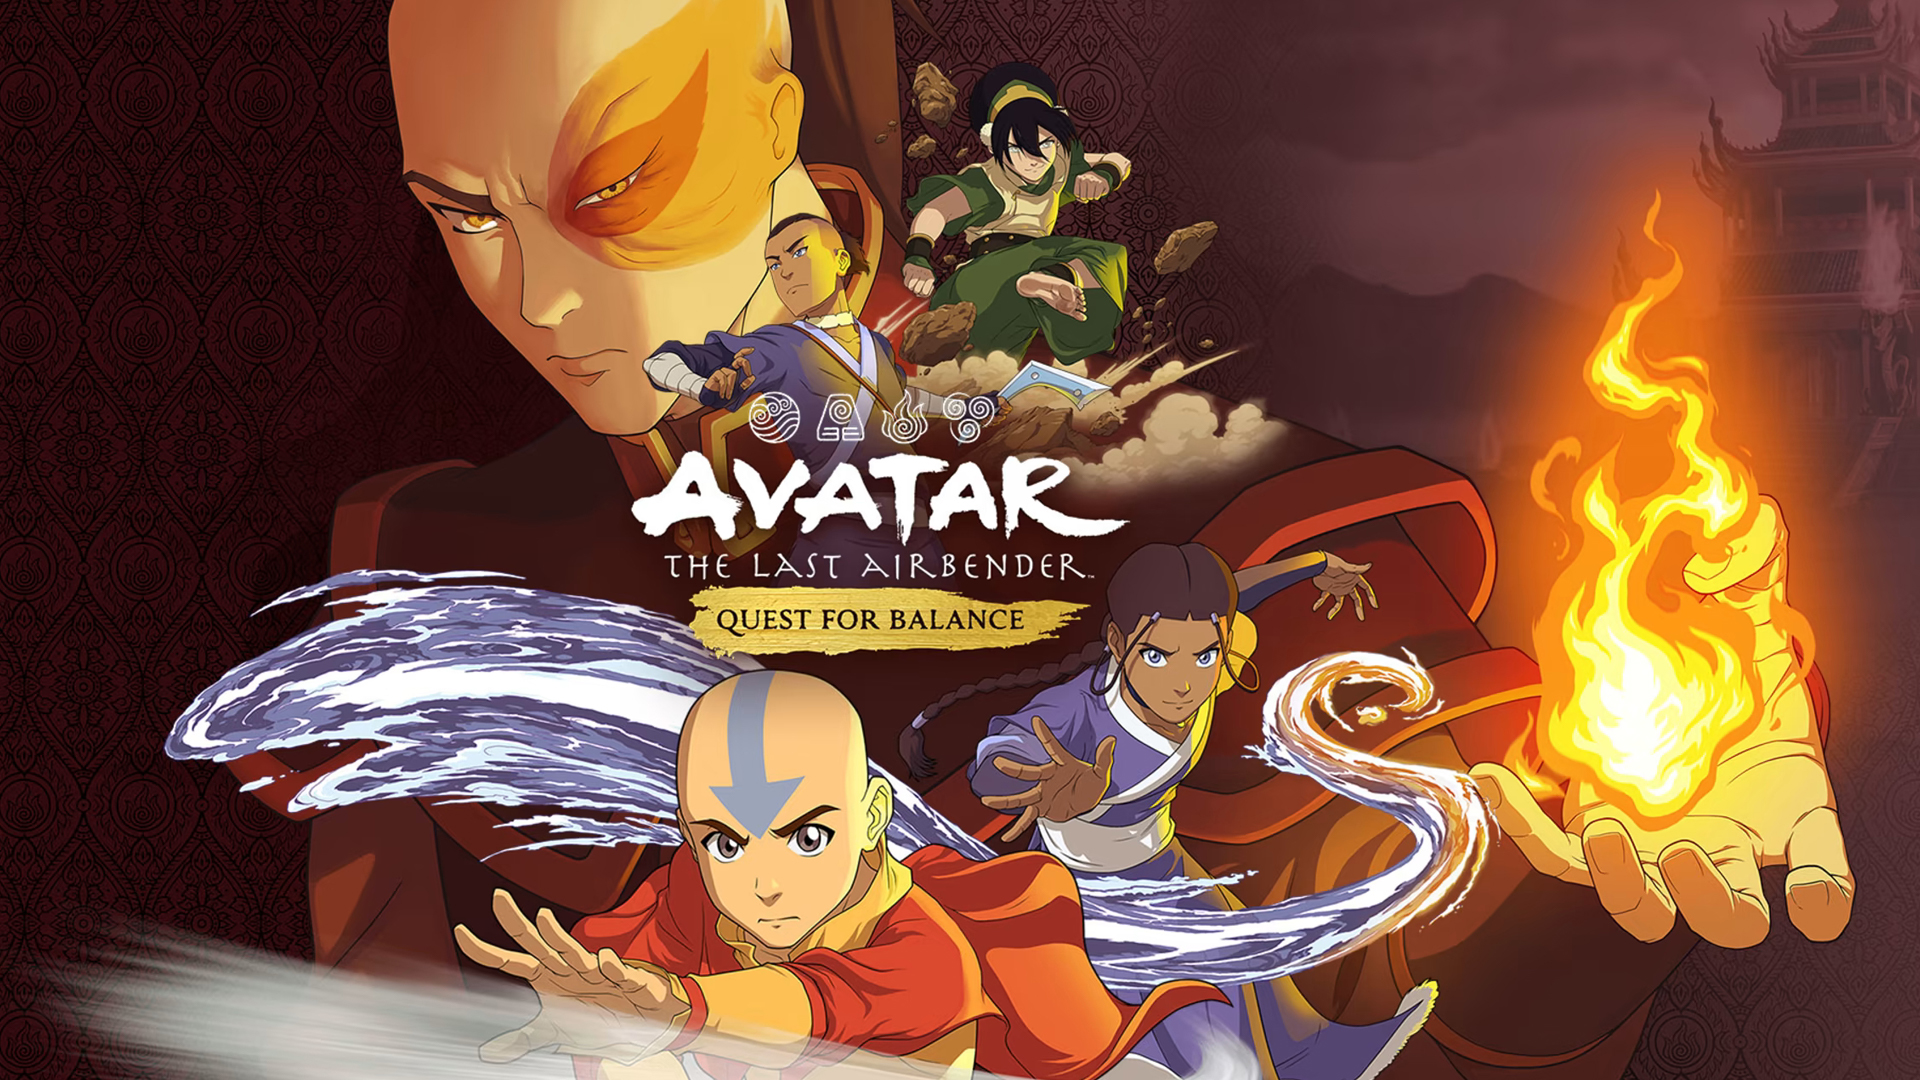 Avatar: The Last Airbender: Quest for Balance is now available